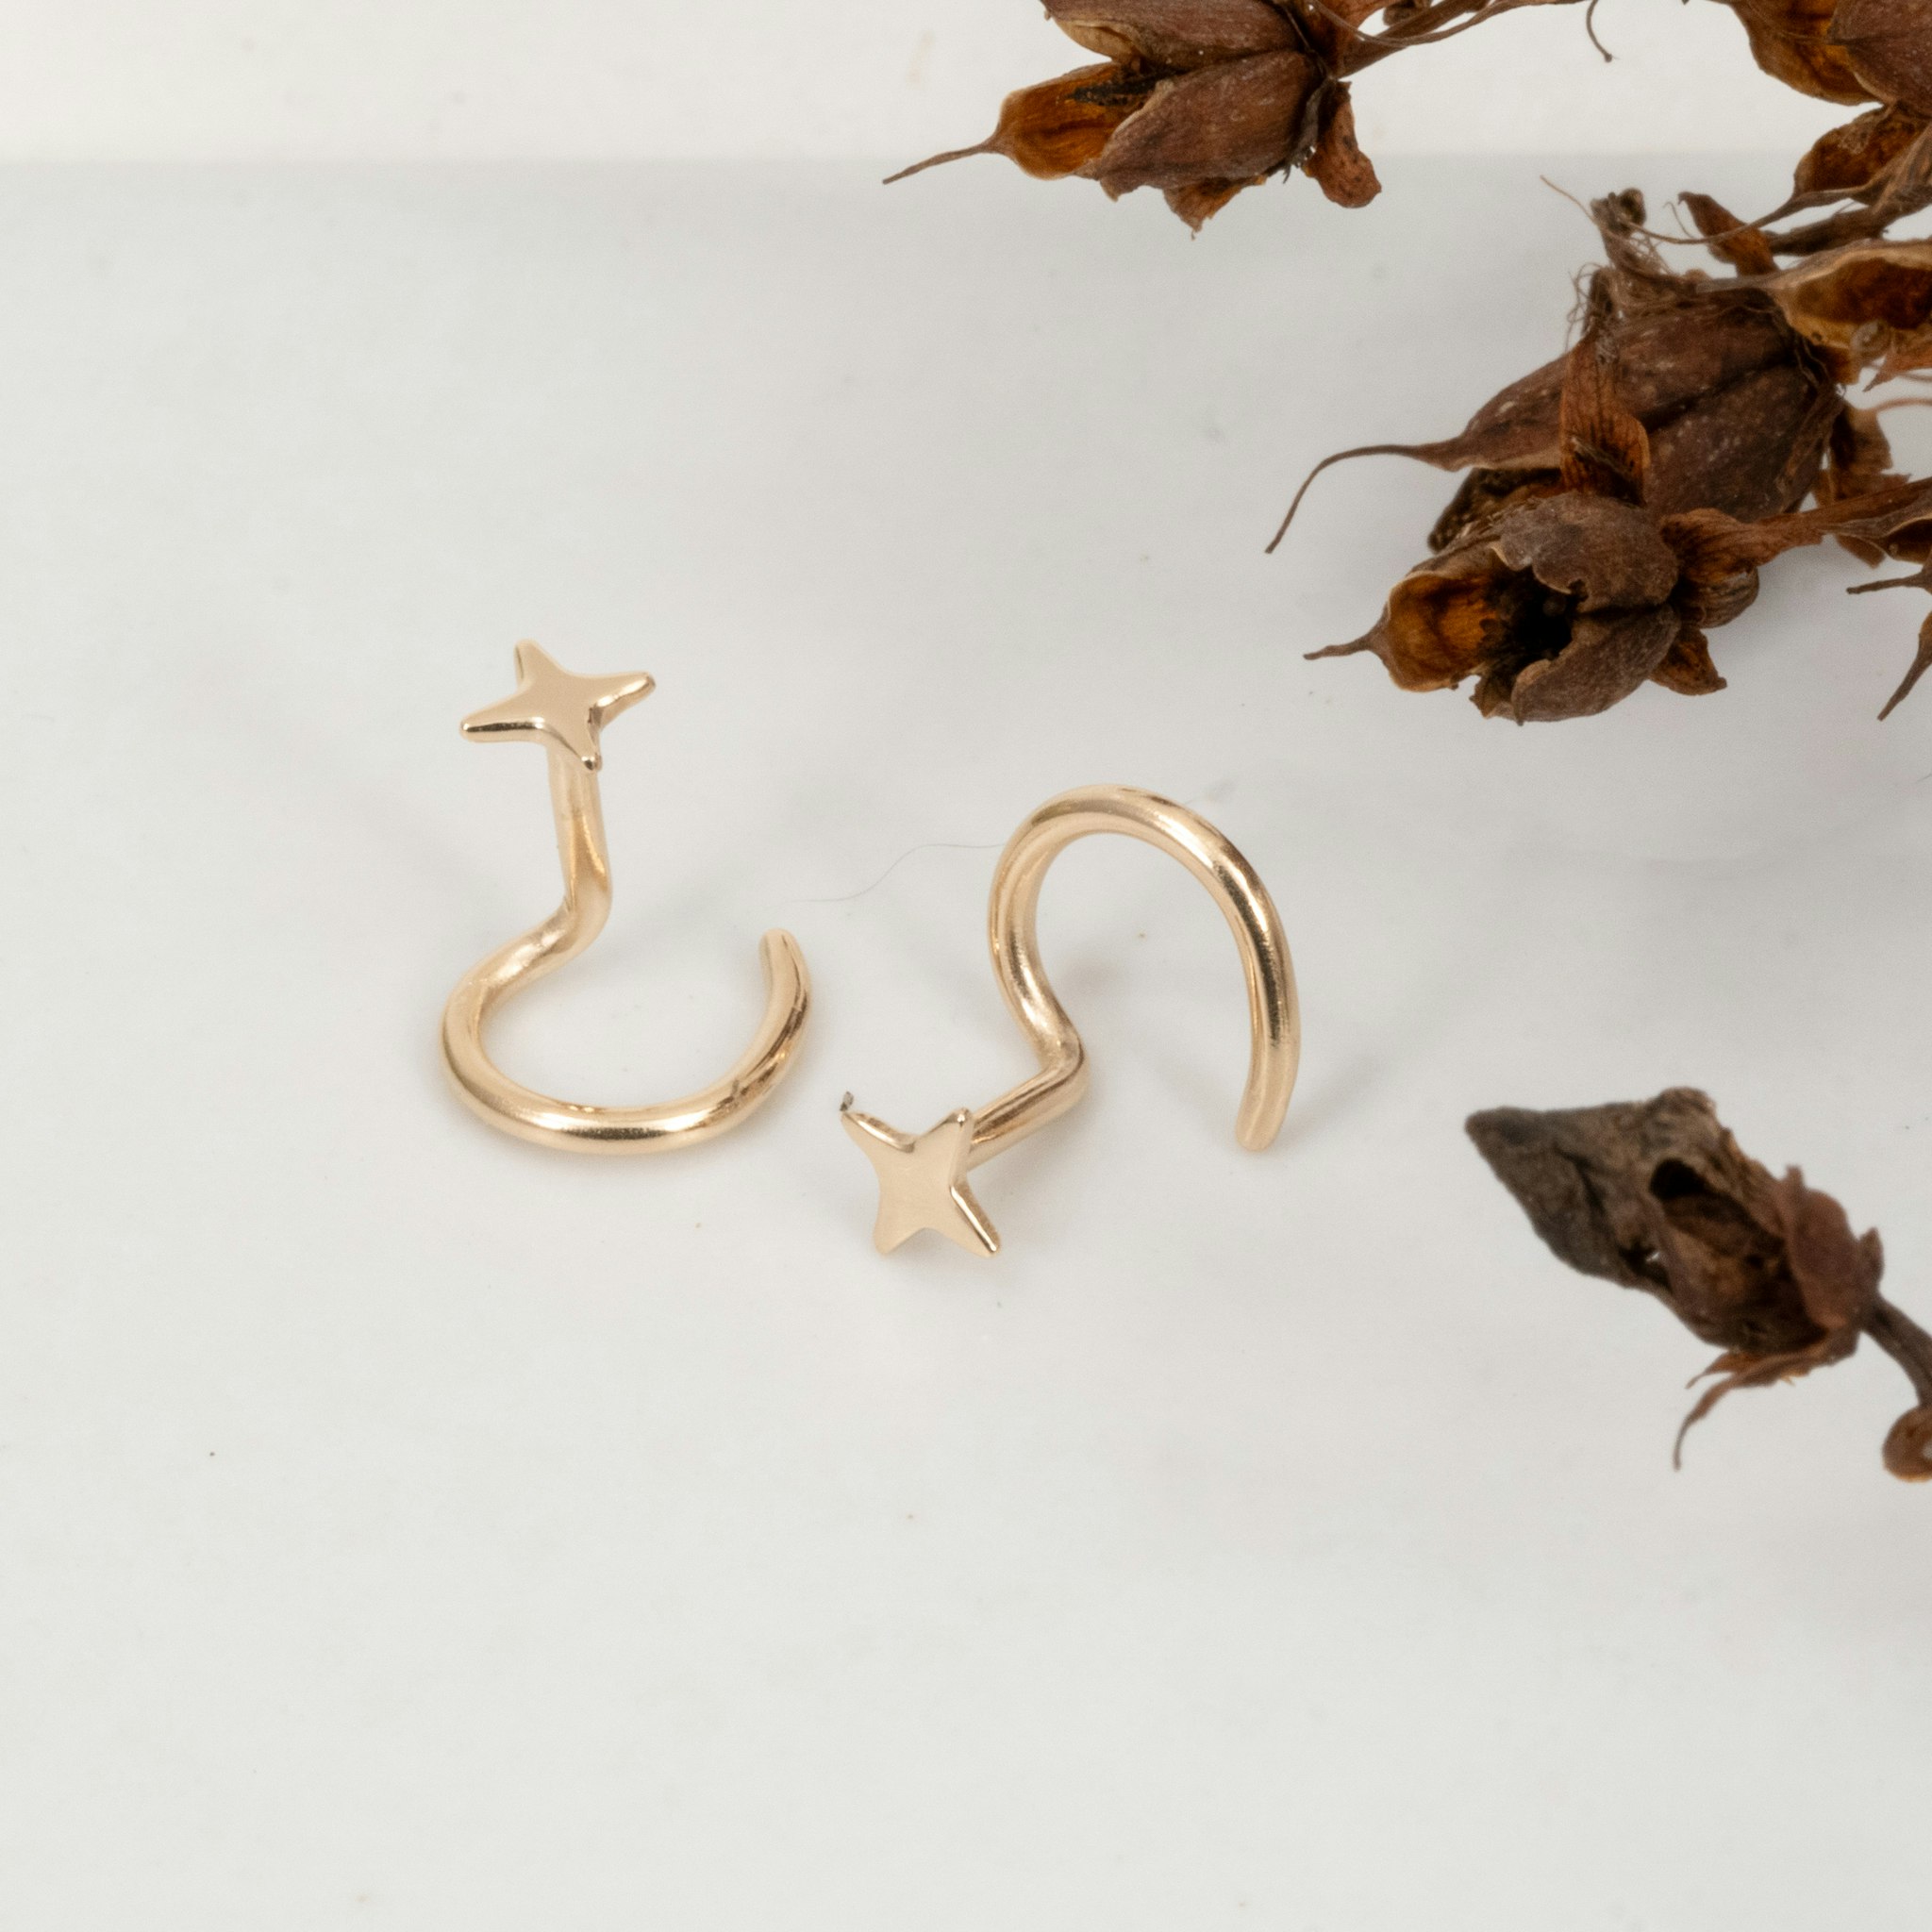 18K Micro Star - Comfort Earrings Recycled Gold